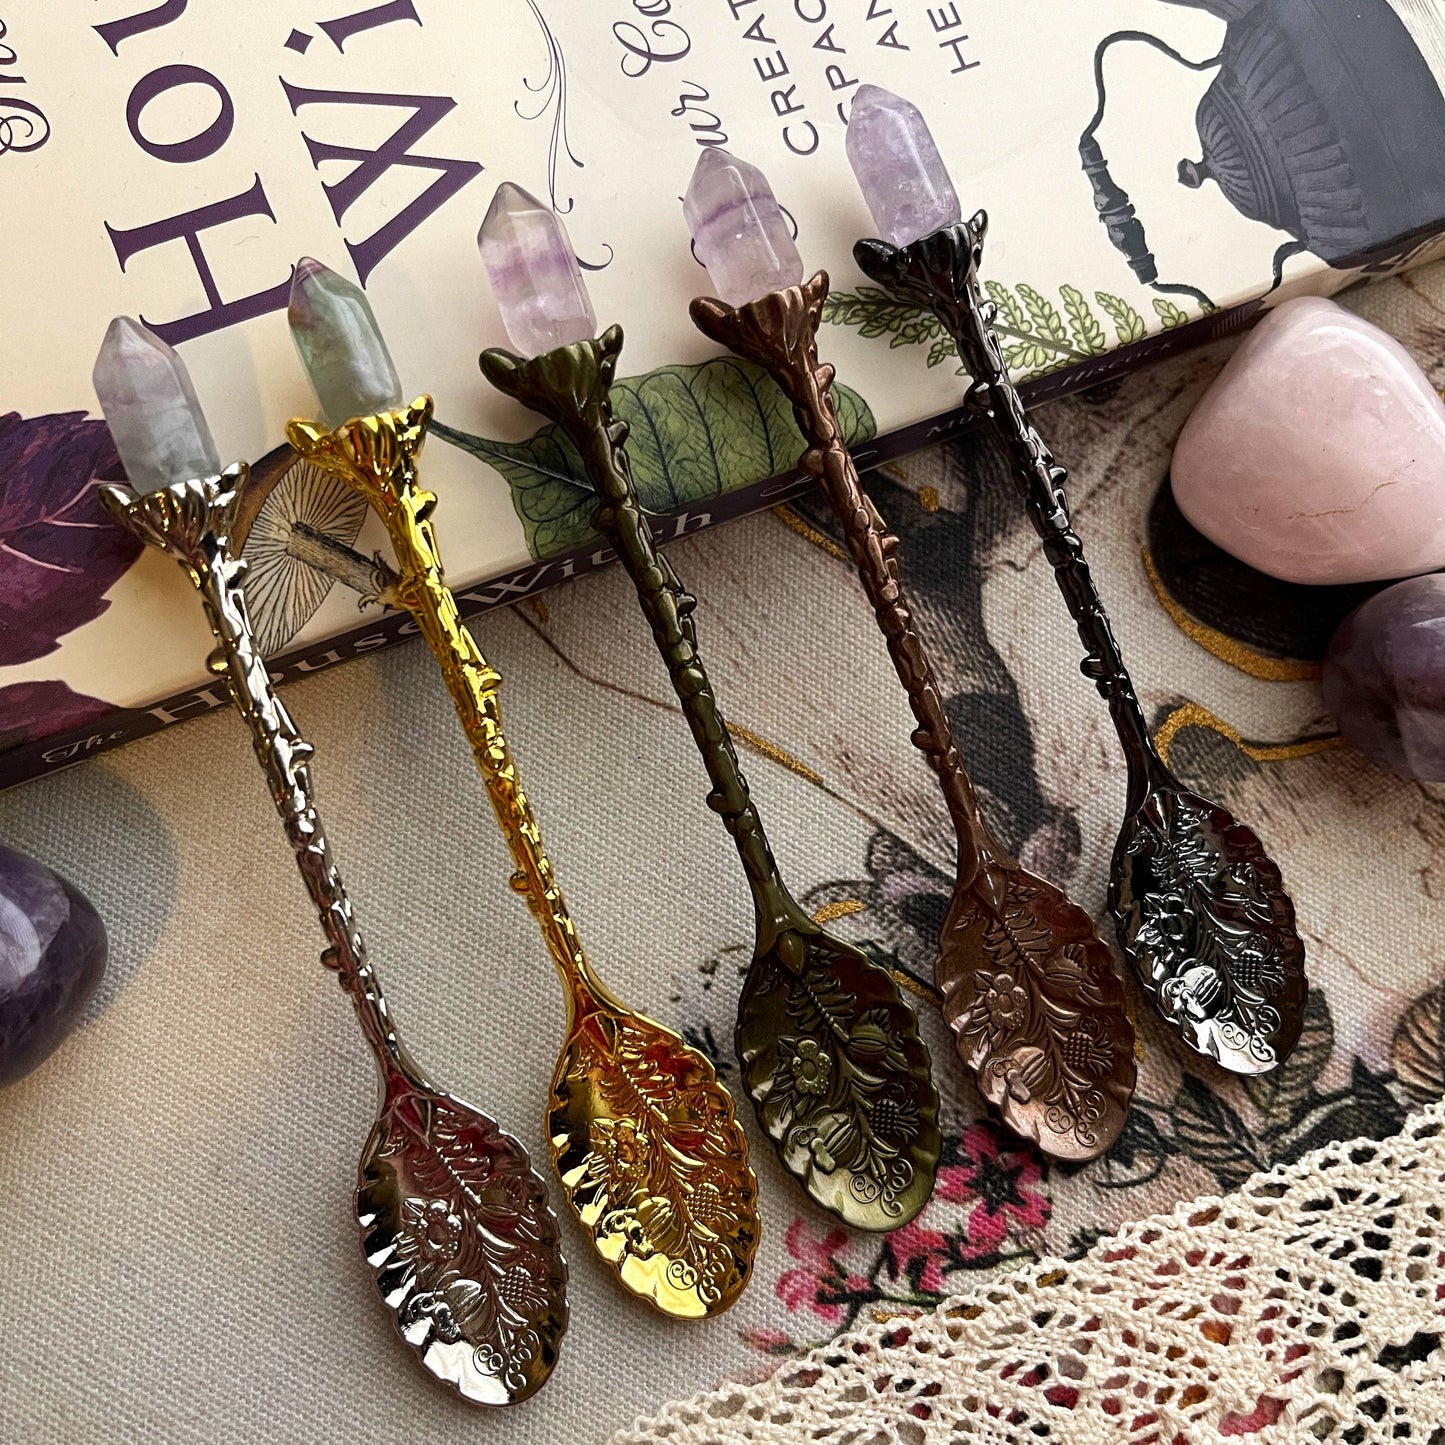 Rainbow Fluorite Crystal Witchy Herb / Apothecary Spoons